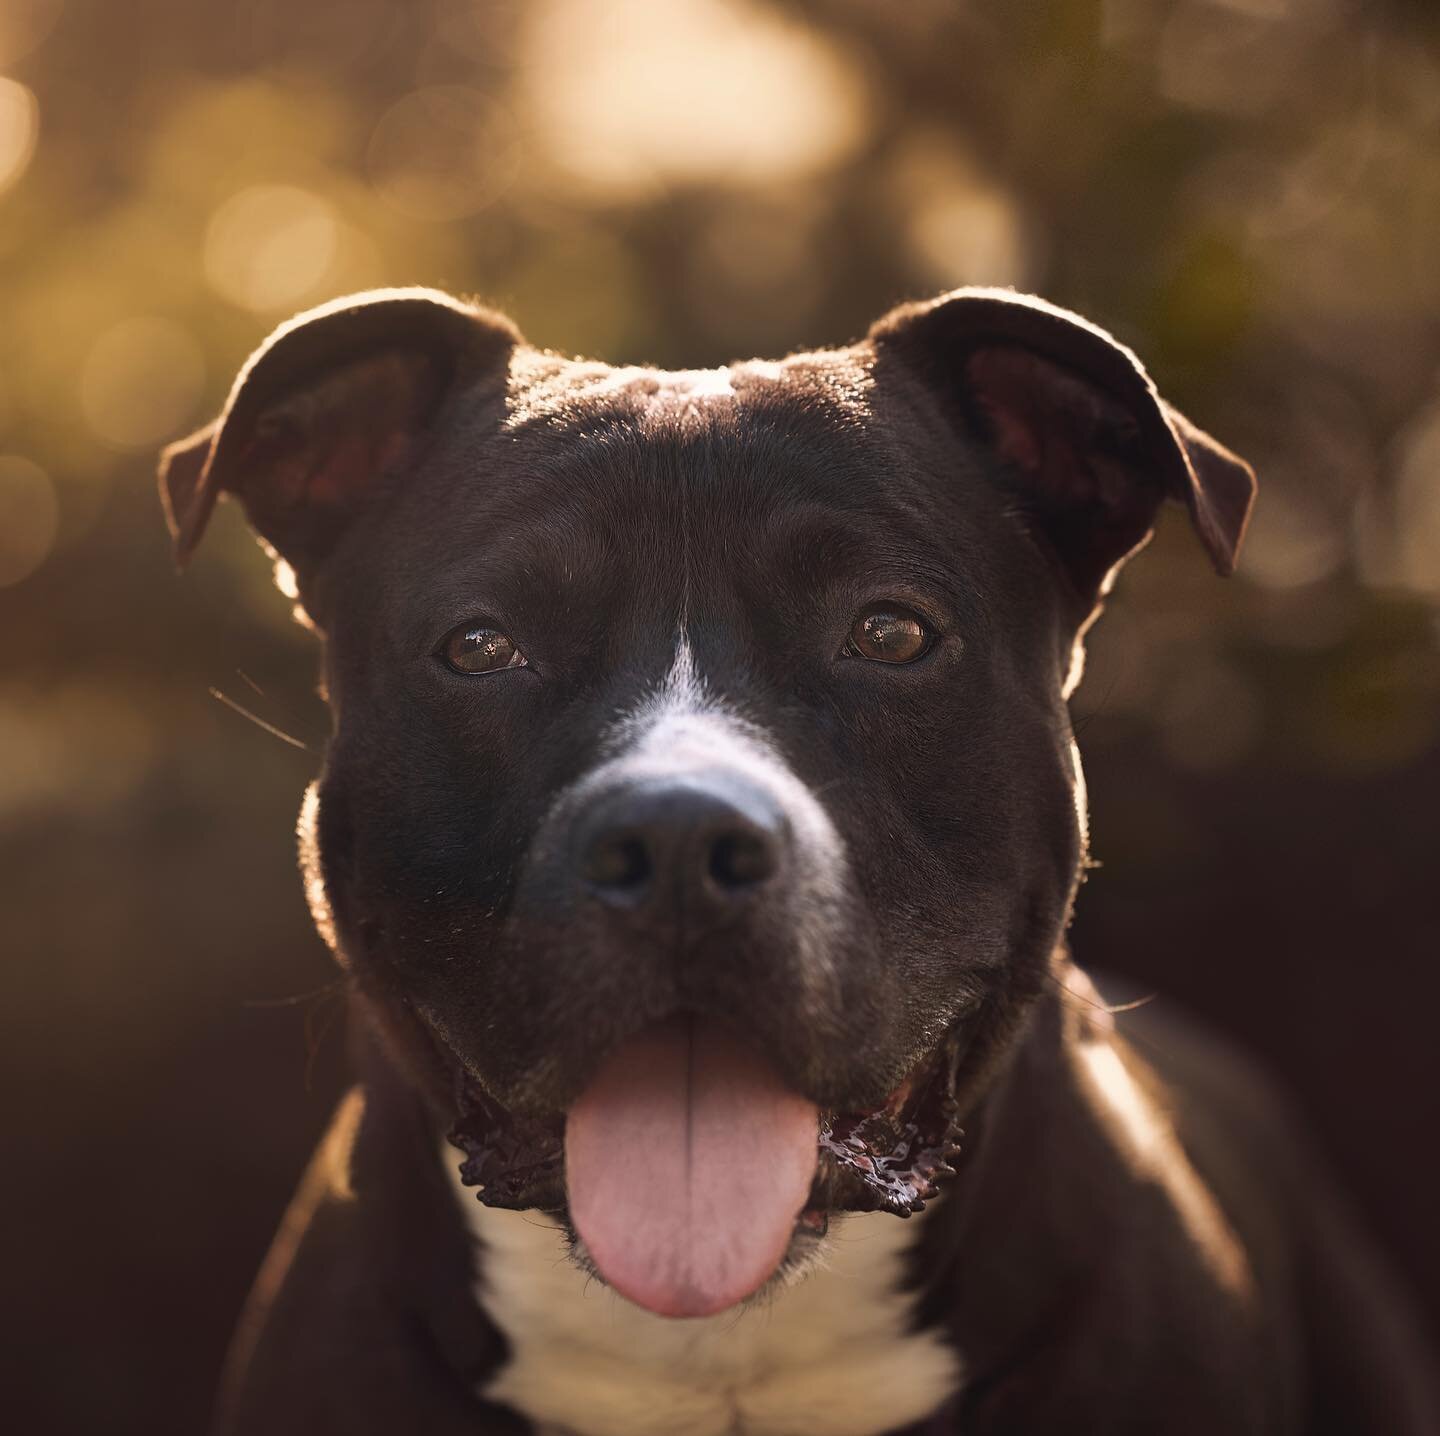 Tag someone who loves their pet to no limit! 🤗 They&rsquo;ll be entered for a chance to win a free framed pawtrait of their beloved pet! 🐾Eligible winners must be able to commute to the Bergen County, New Jersey area for a 1 hour pet photo session!